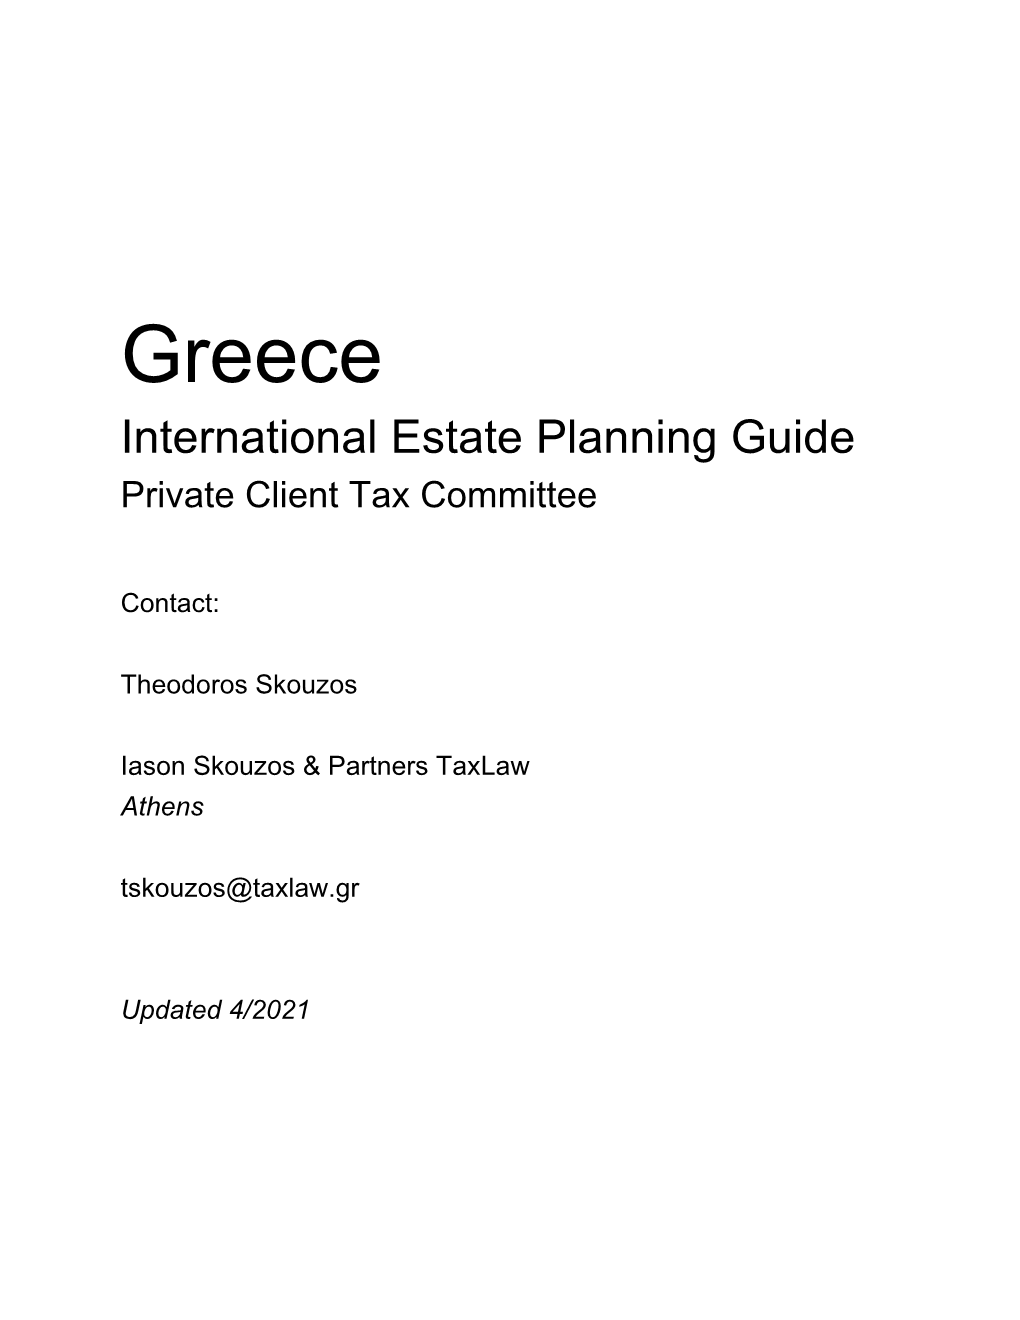 Greece International Estate Planning Guide Private Client Tax Committee